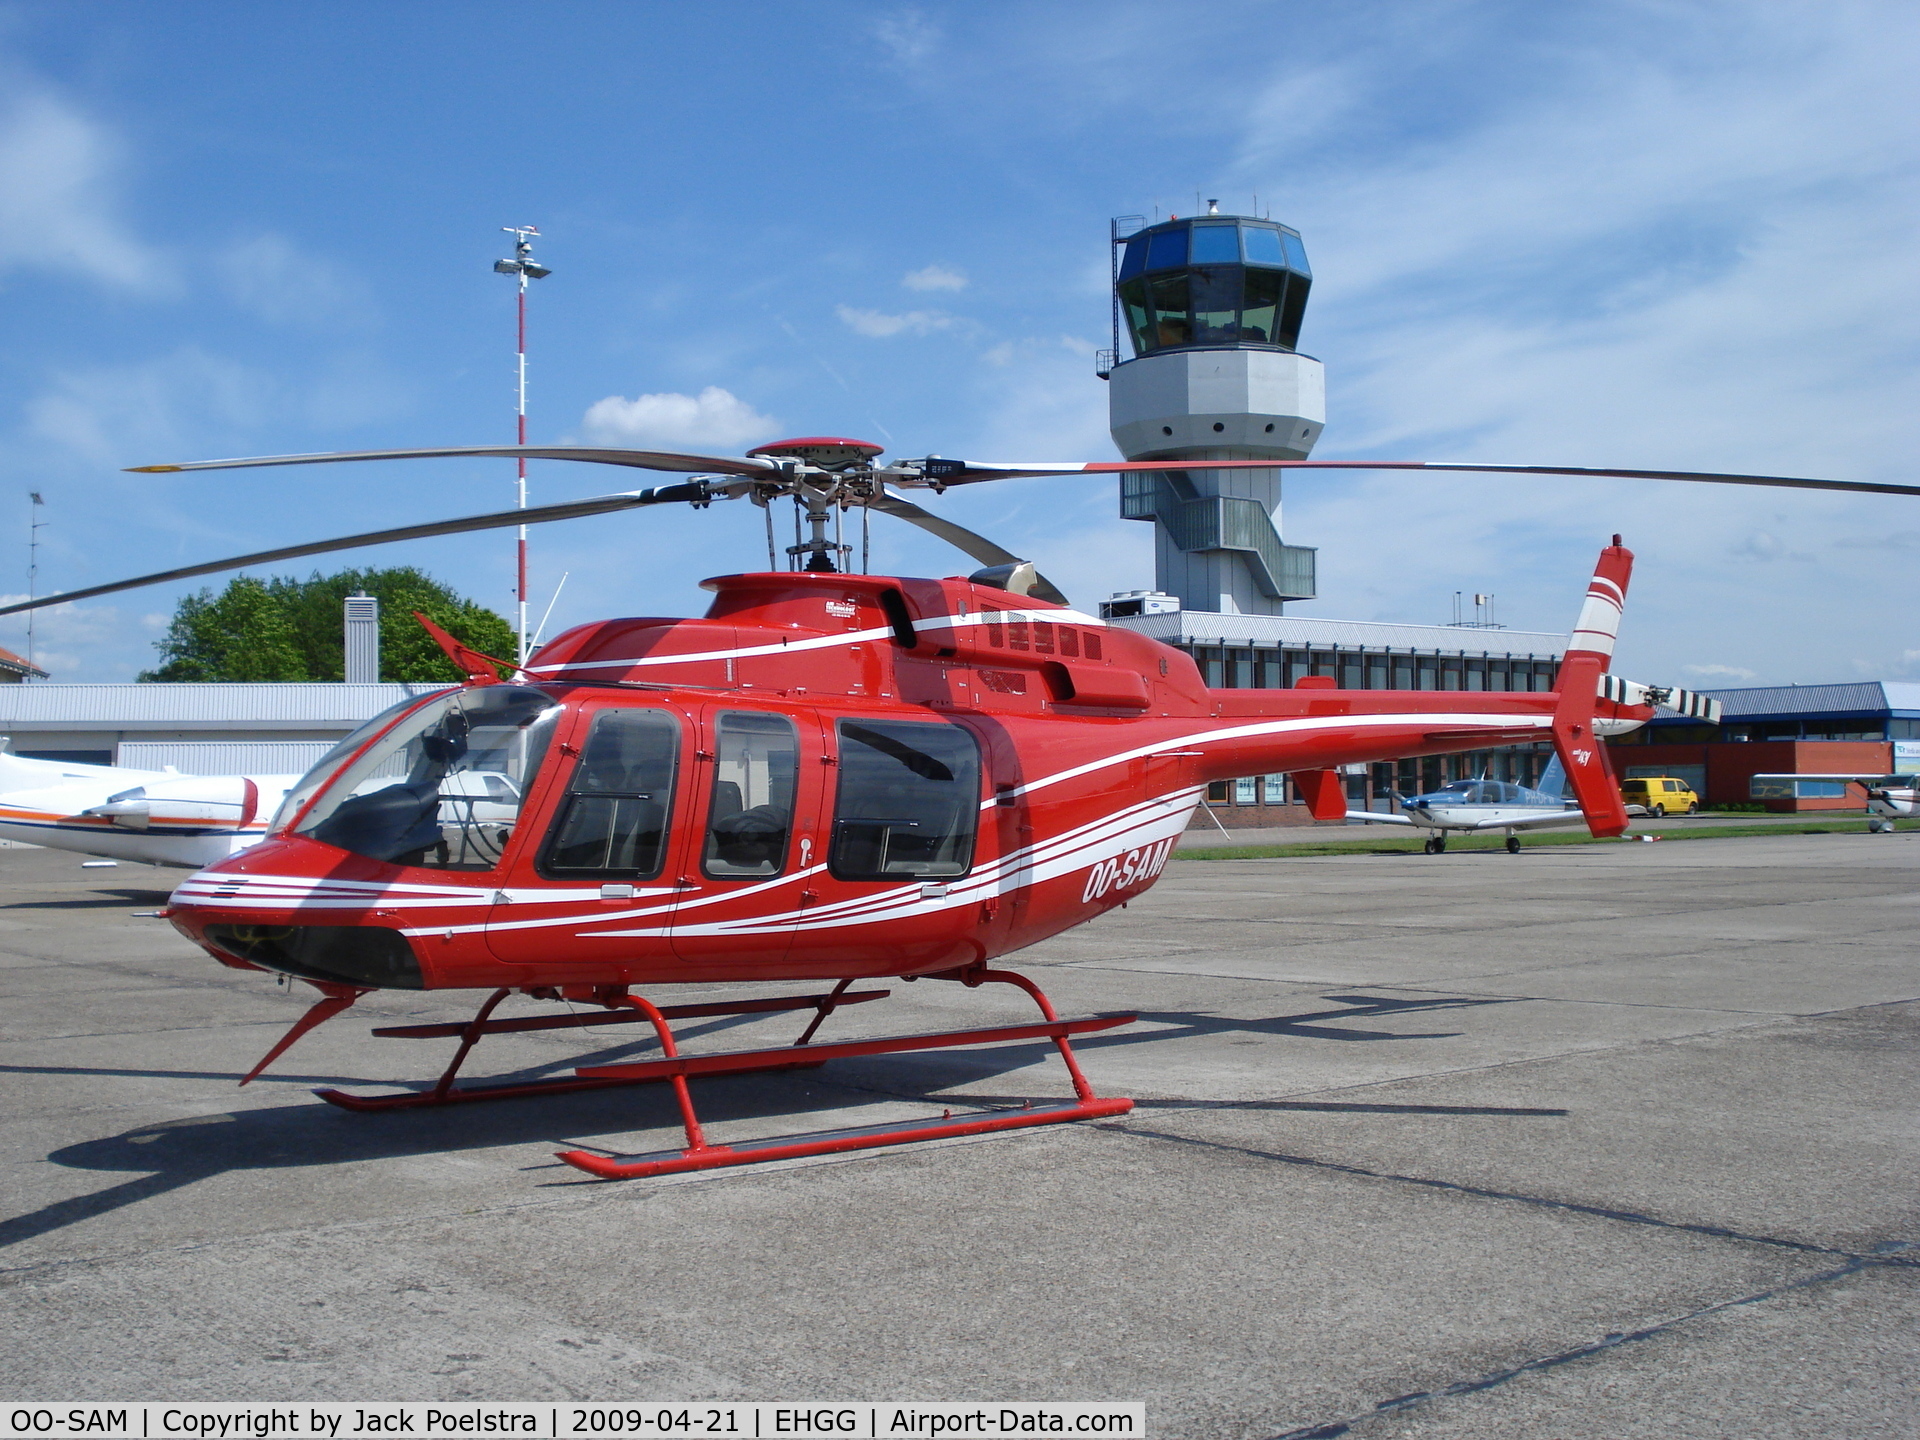 OO-SAM, 2007 Bell 407 C/N 53752, Bell 407 at Groningen airport